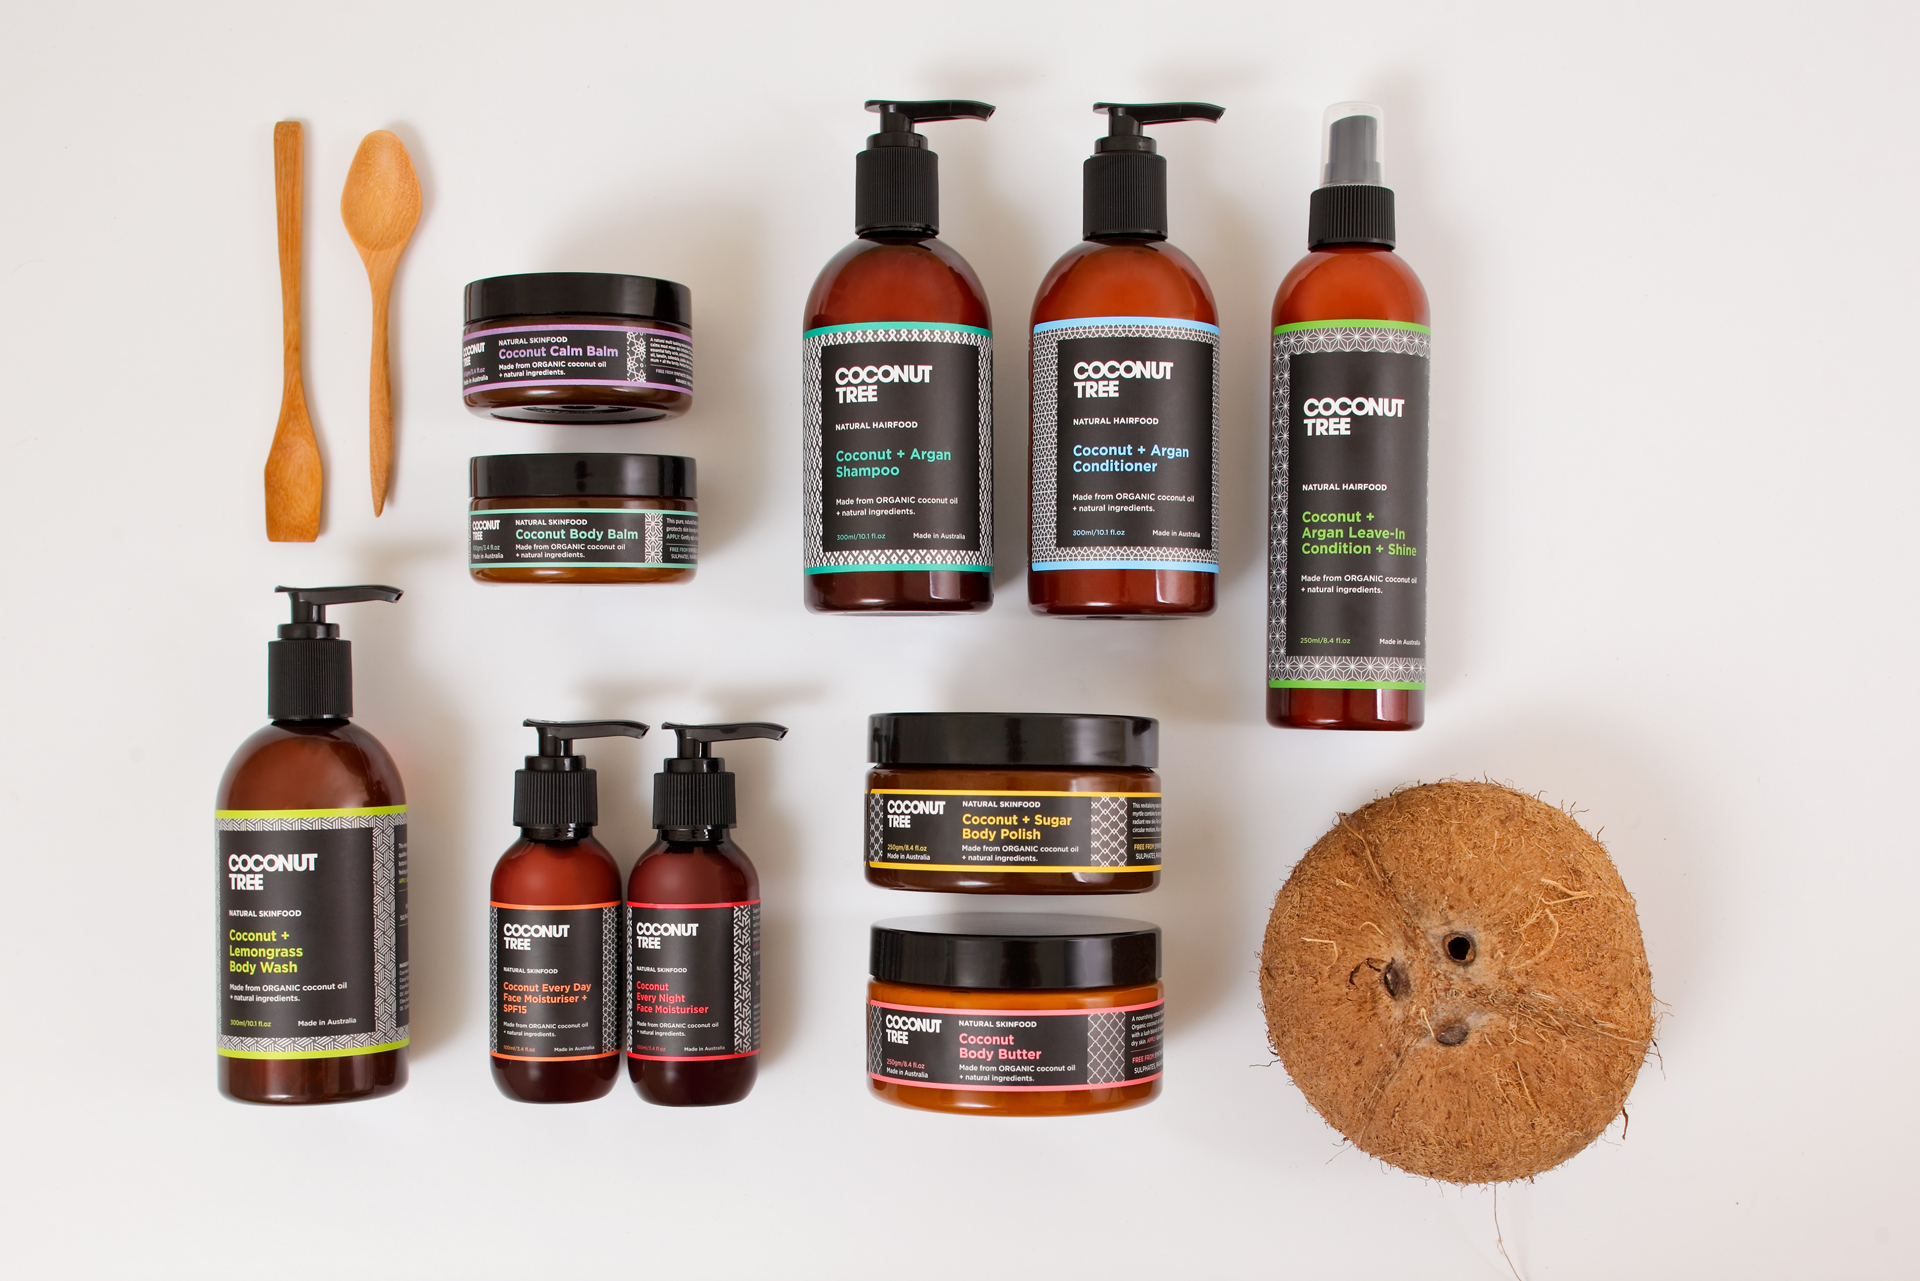 Coconut Tree products